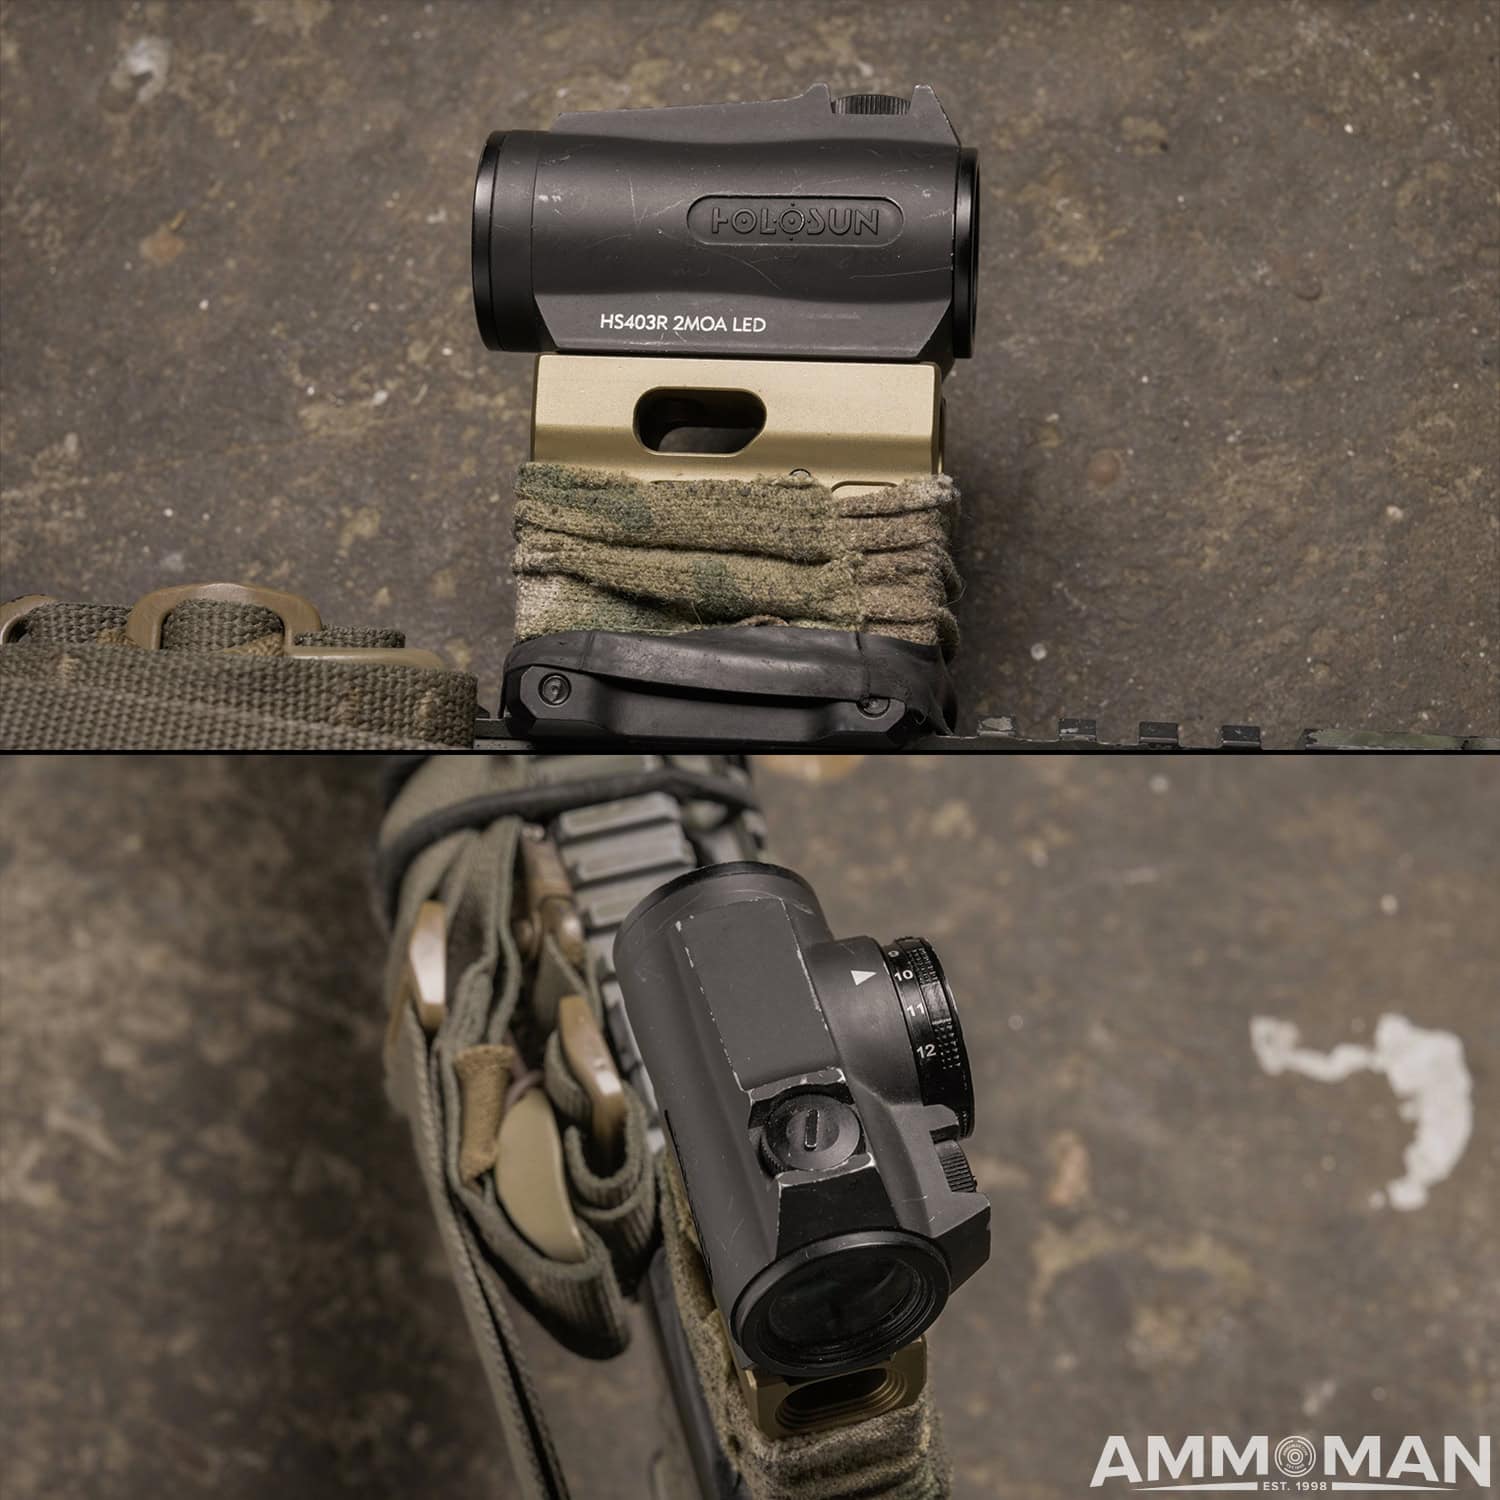 Close up pictures of a red dot sight